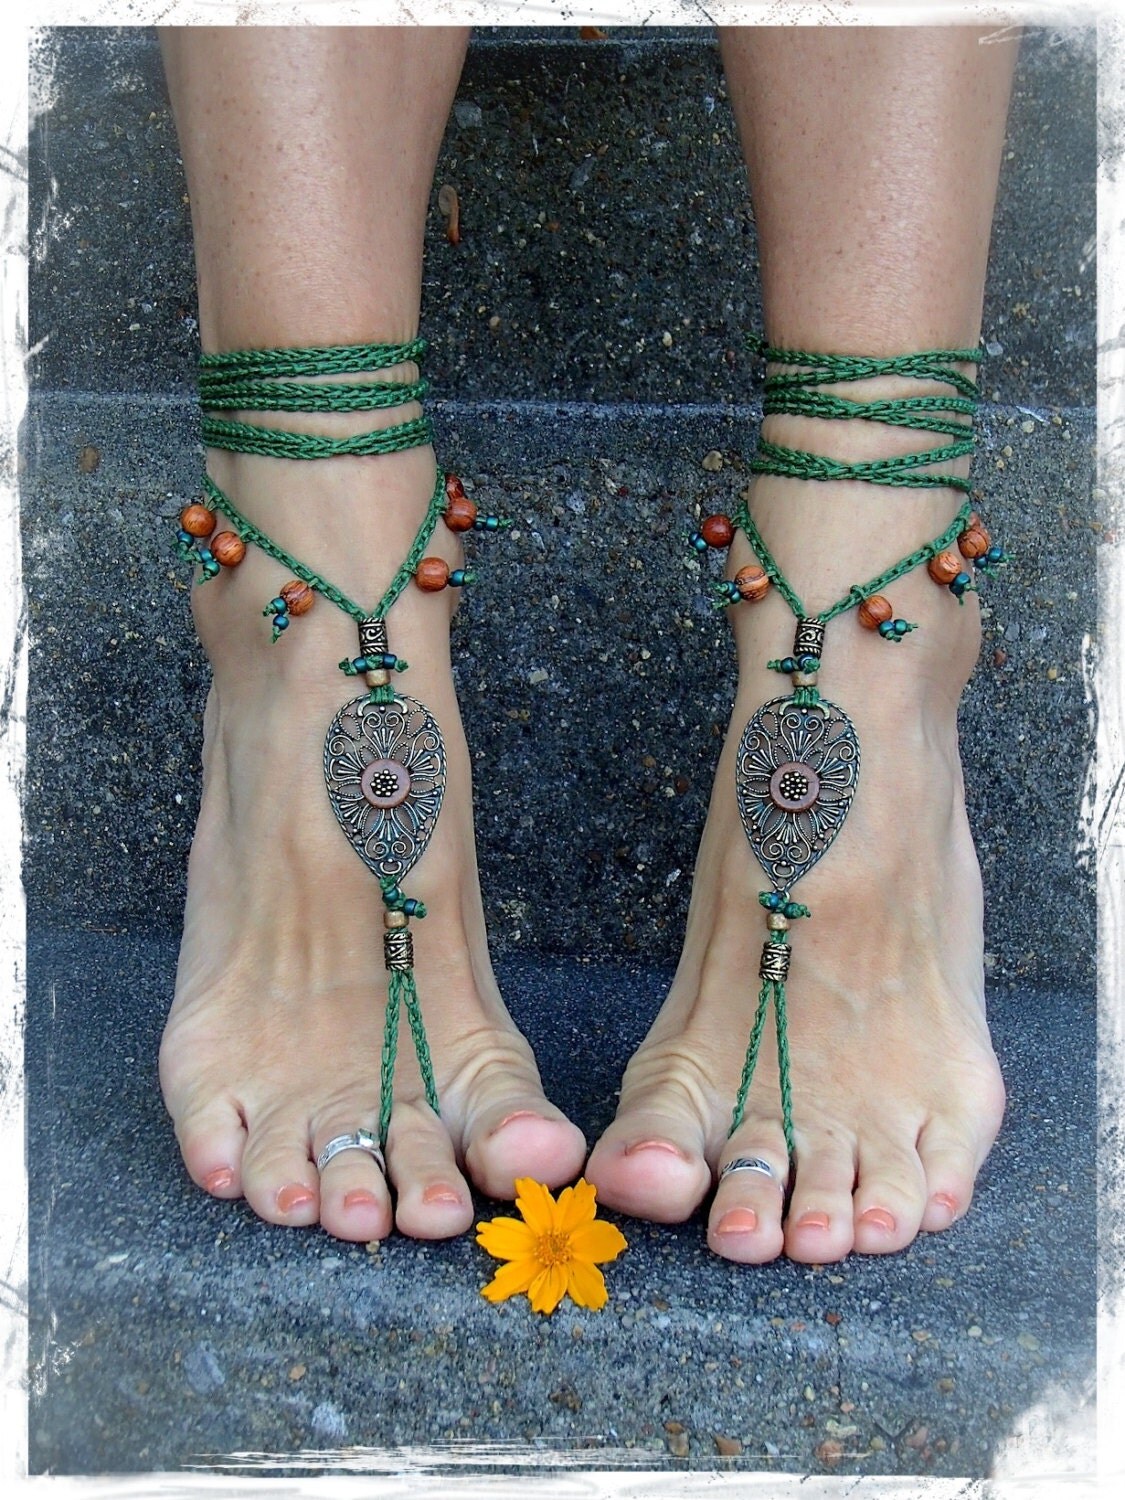 Woodland FAIRY BAREFOOT sandals Pea Green Tribal ANKLETS Gypsy